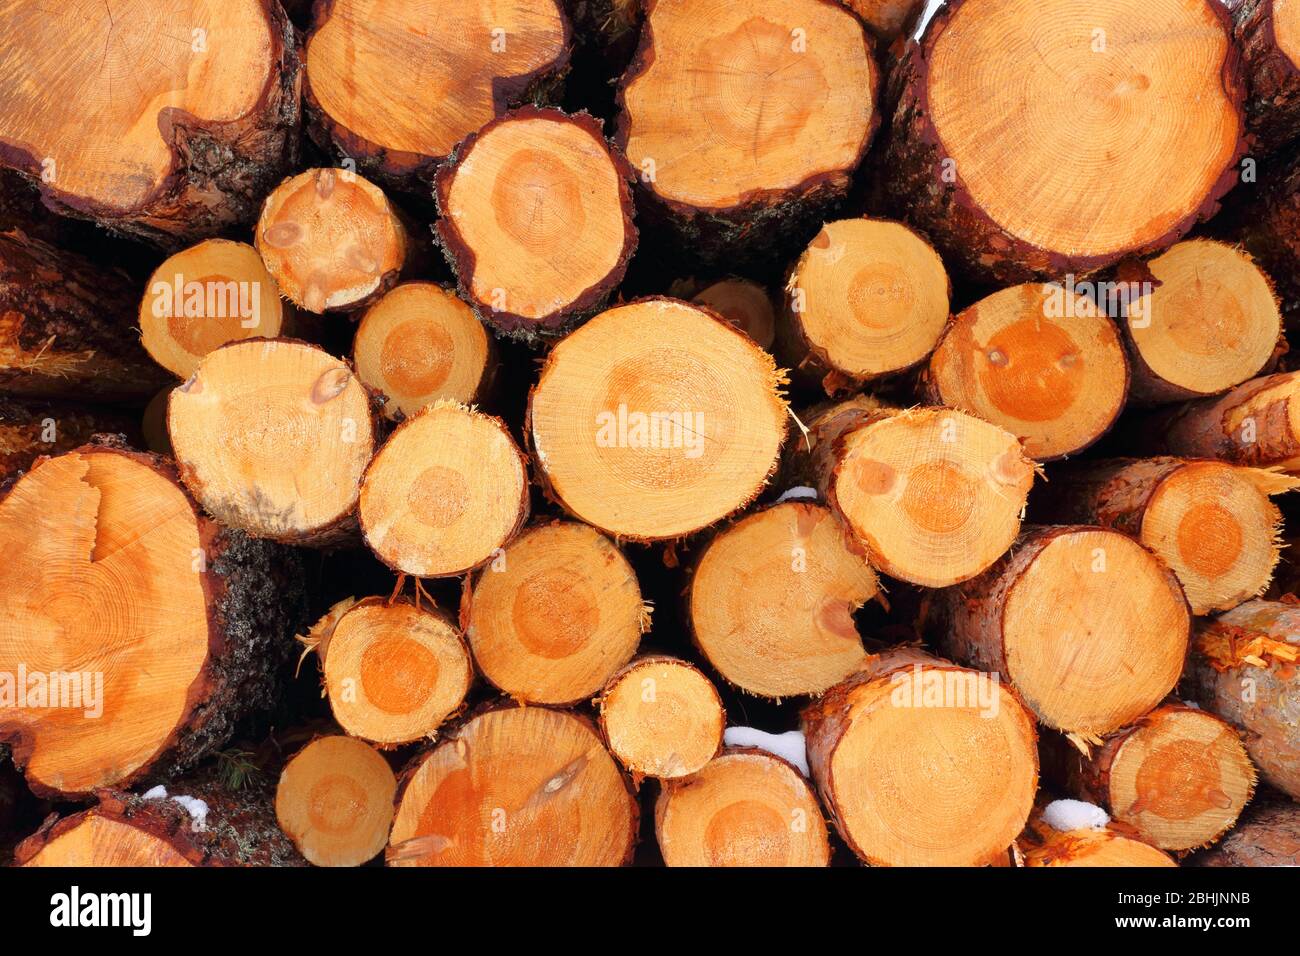 Log pile of freshly felled common spruce trees (Picea abies) with clearly visible tree rings, Trøndelag, Norway Stock Photo